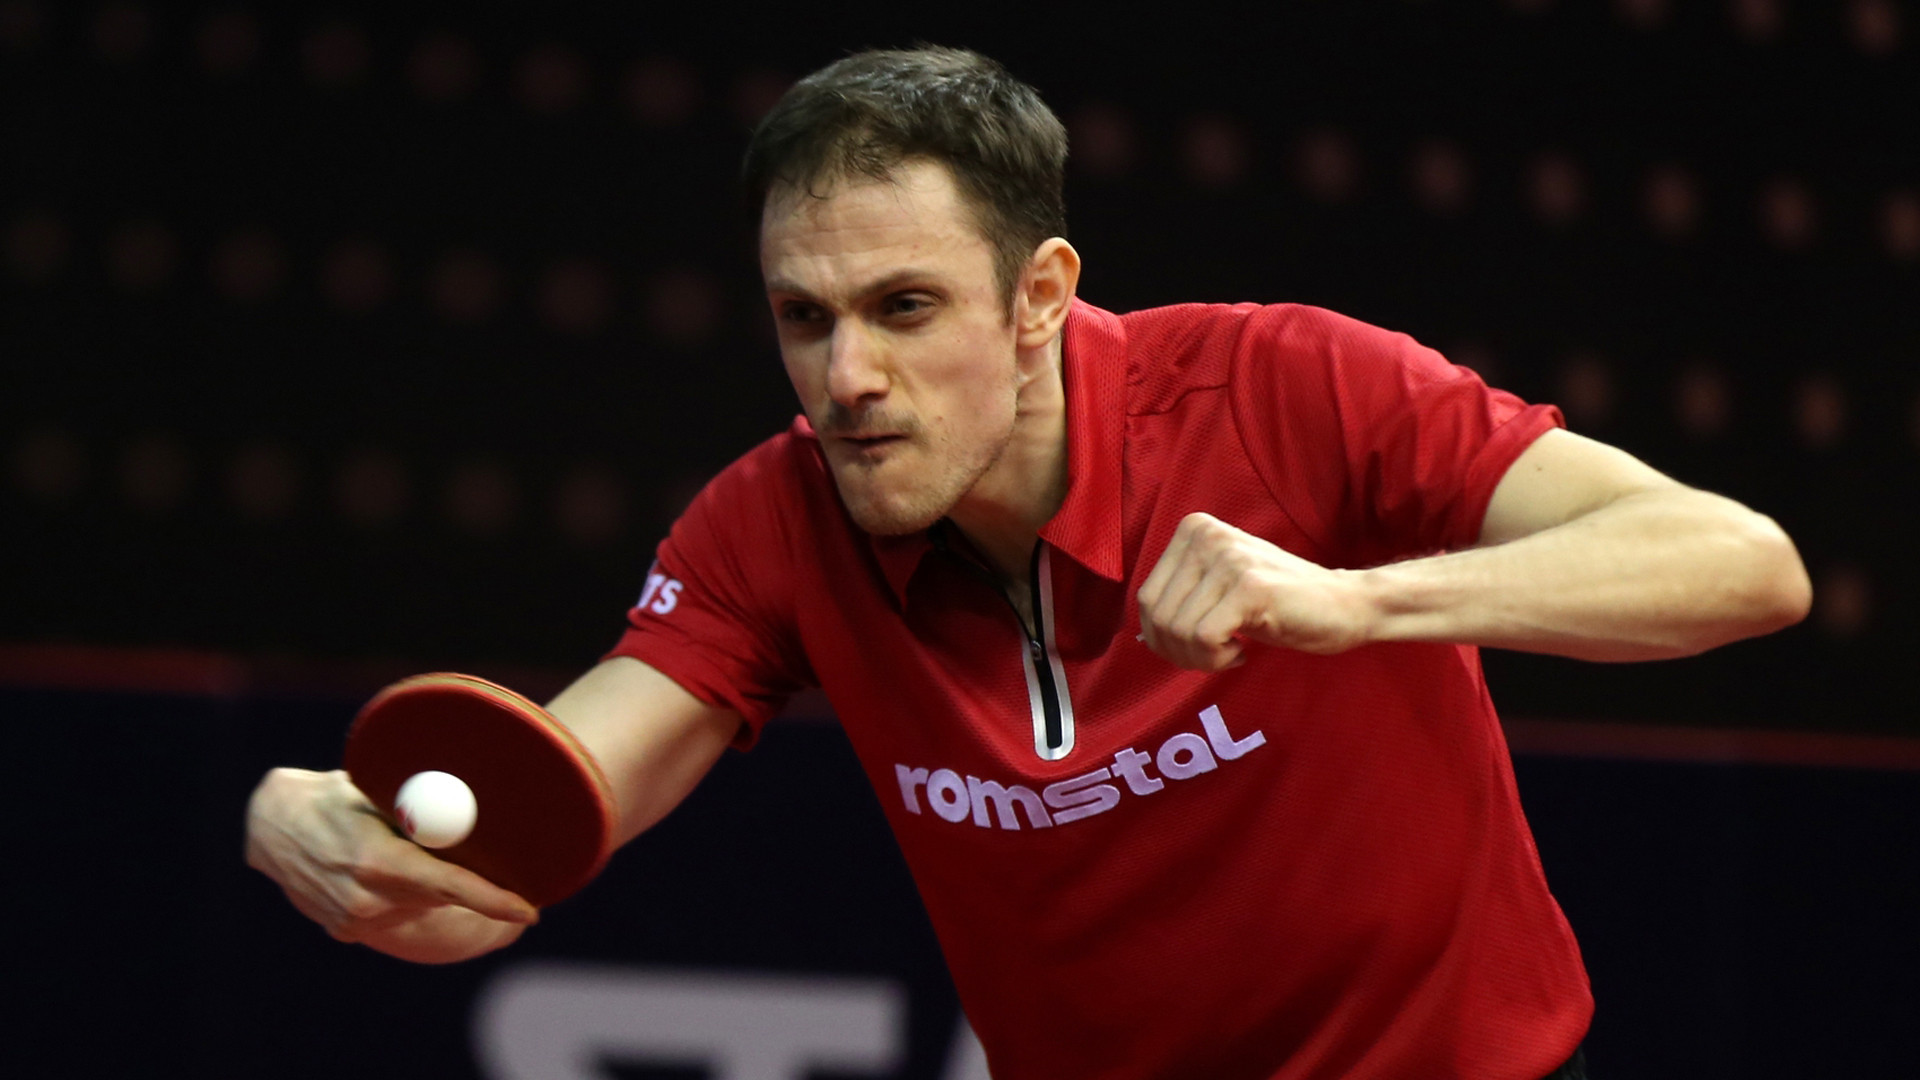 World silver medallists partners in defeat as ITTF European Olympic qualifier starts in Portugal